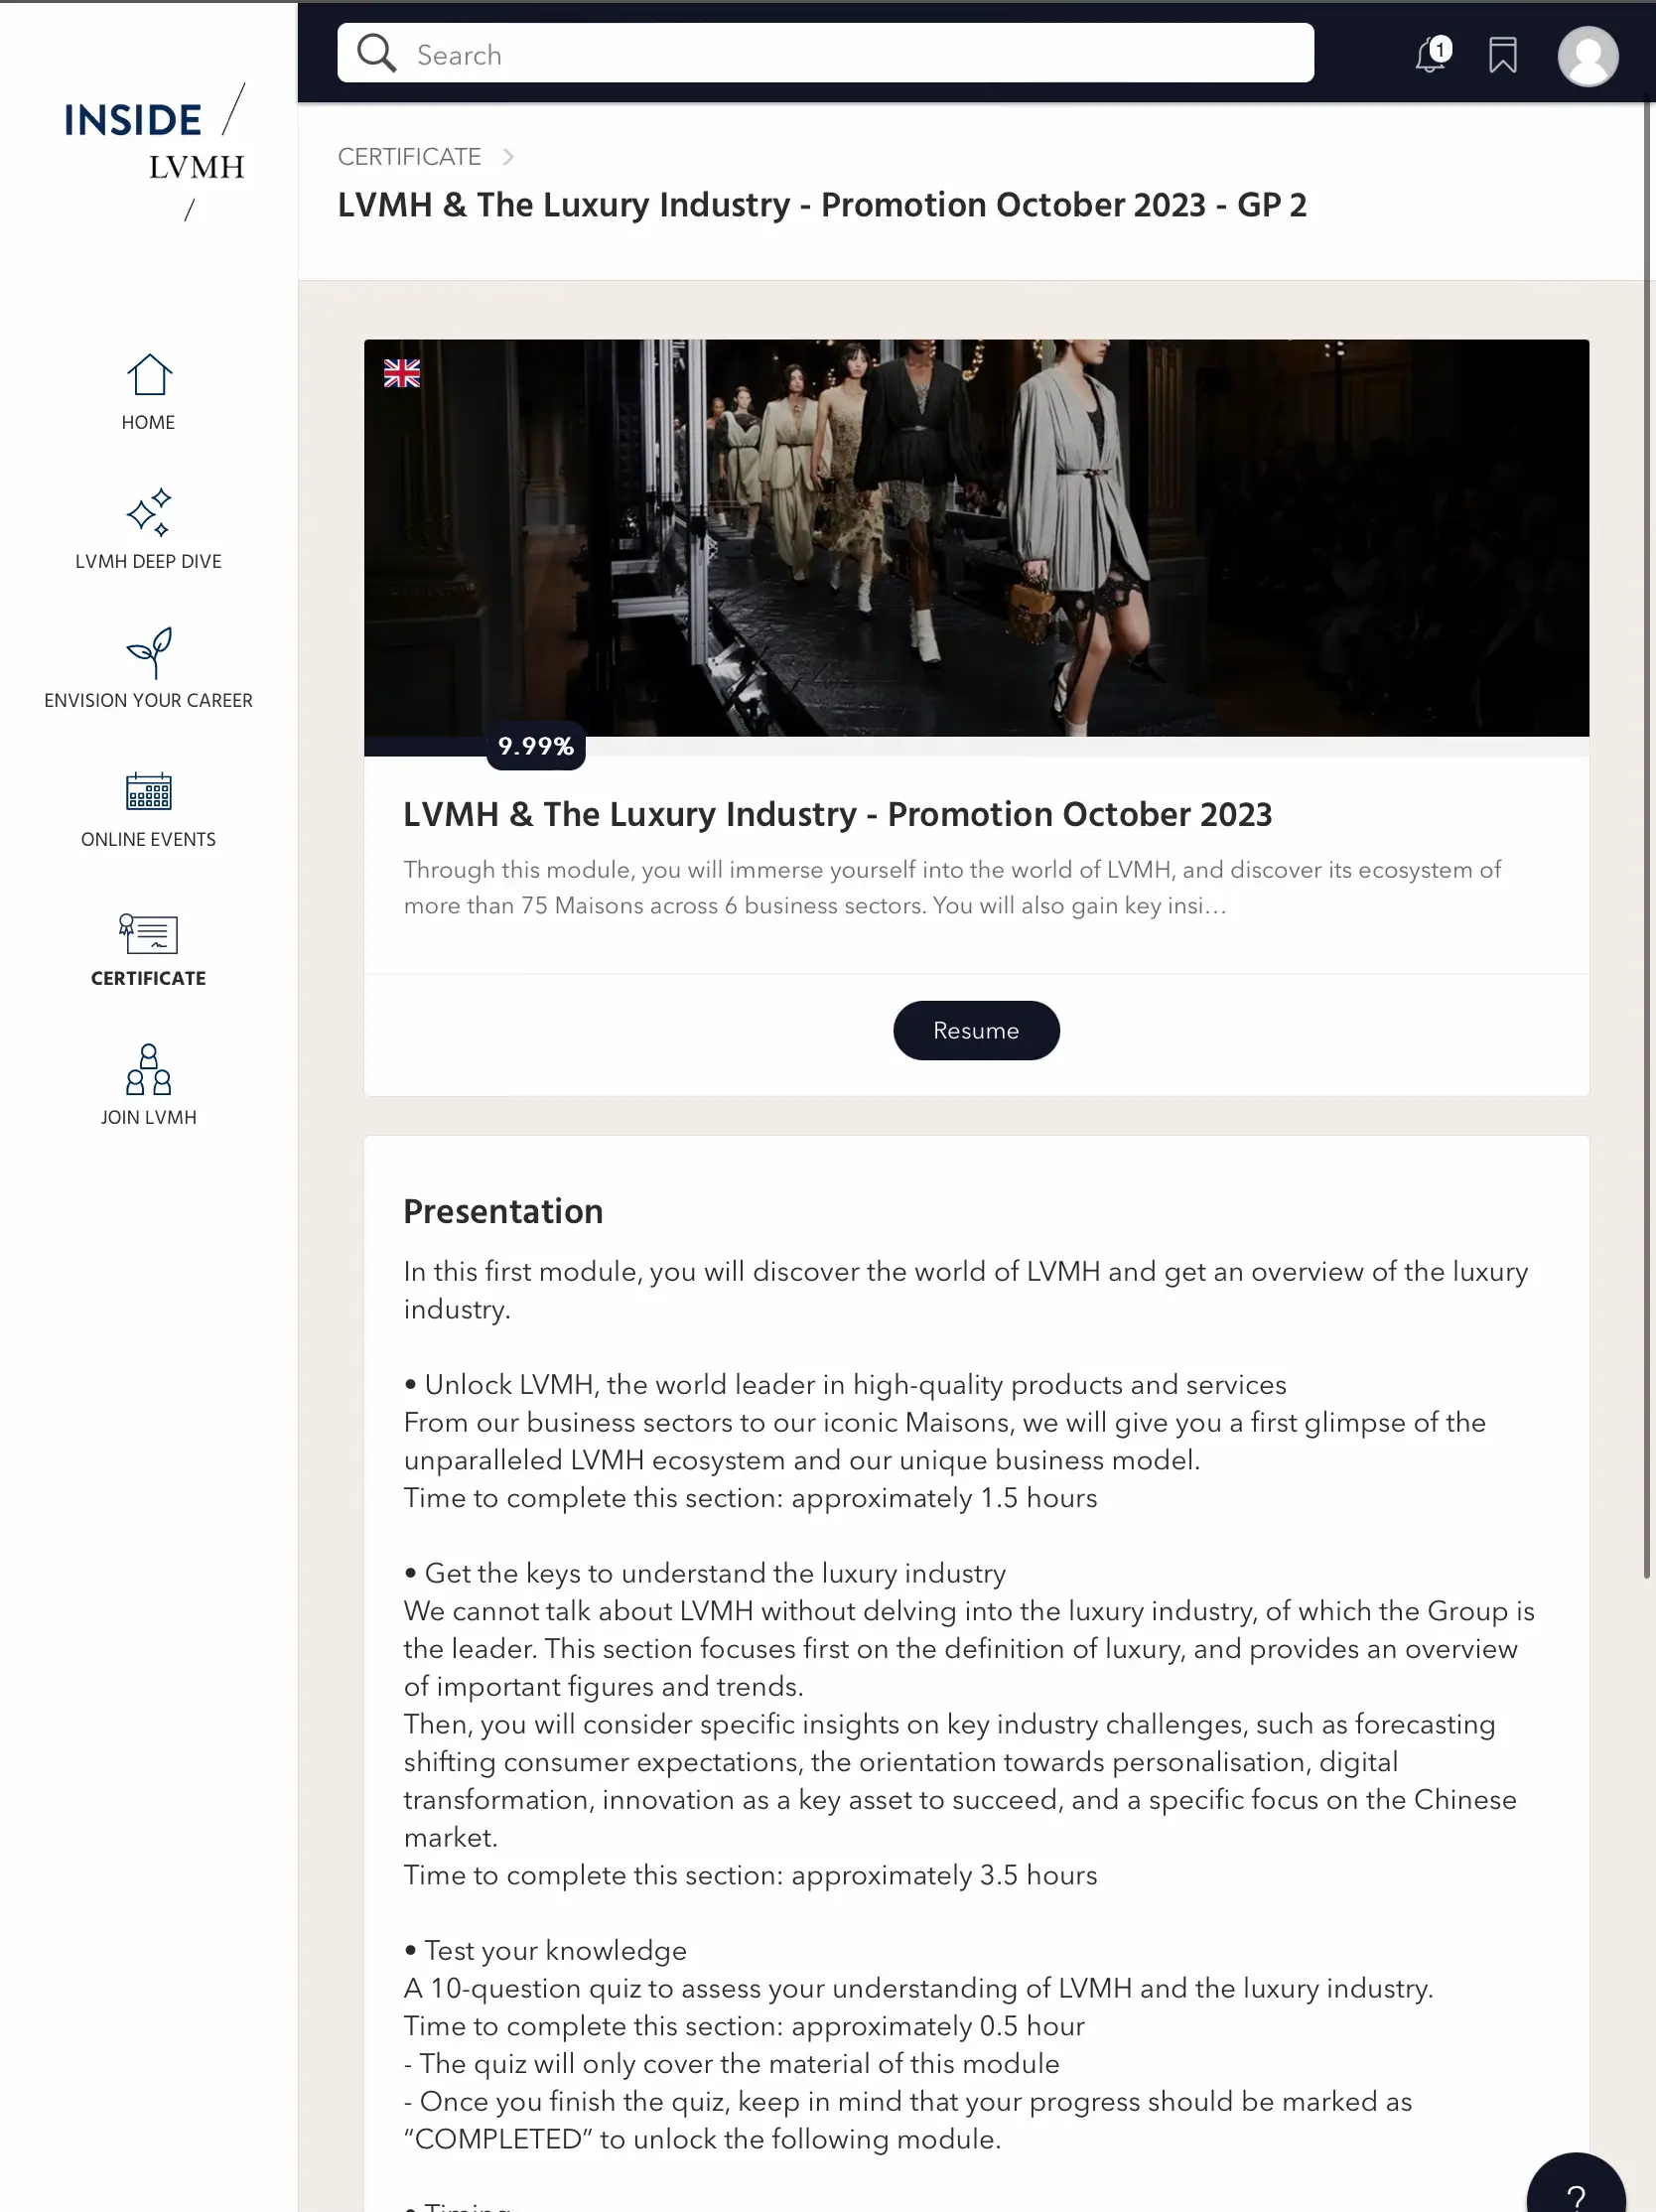 Discover the INSIDE LVMH Certificate